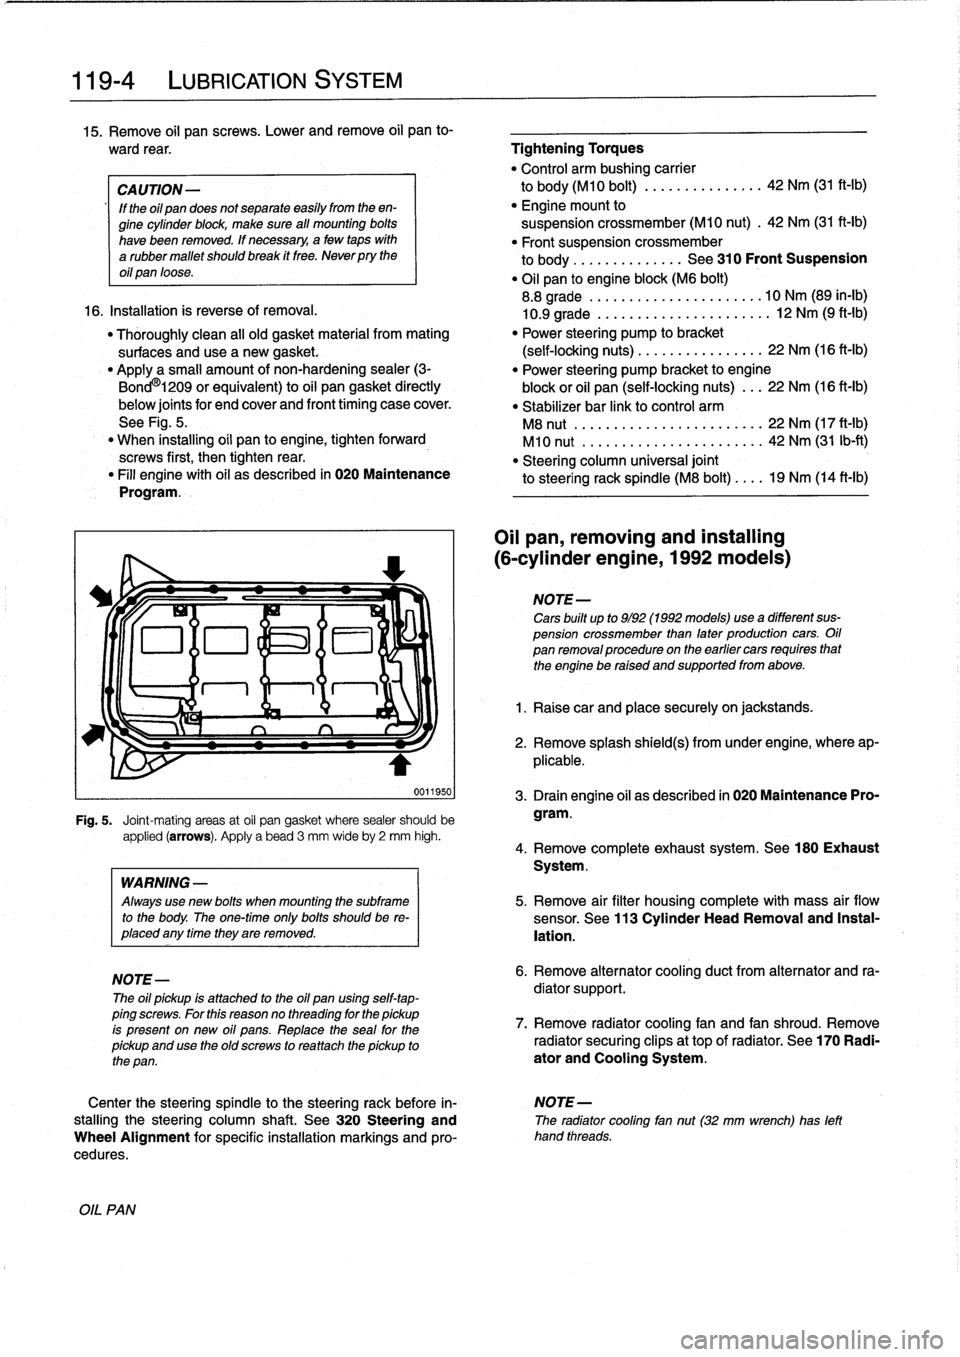 BMW M3 1993 E36 Workshop Manual 
119-
4

	

LUBRICATION
SYSTEM

15
.
Remove
oil
pan
screws
.
Lower
andremove
oil
pan
to-

ward
rear
.

	

Tightening
Torques

"
Control
arm
bushing
carrier

CAUTION-

	

to
body(M10
bolt)
............